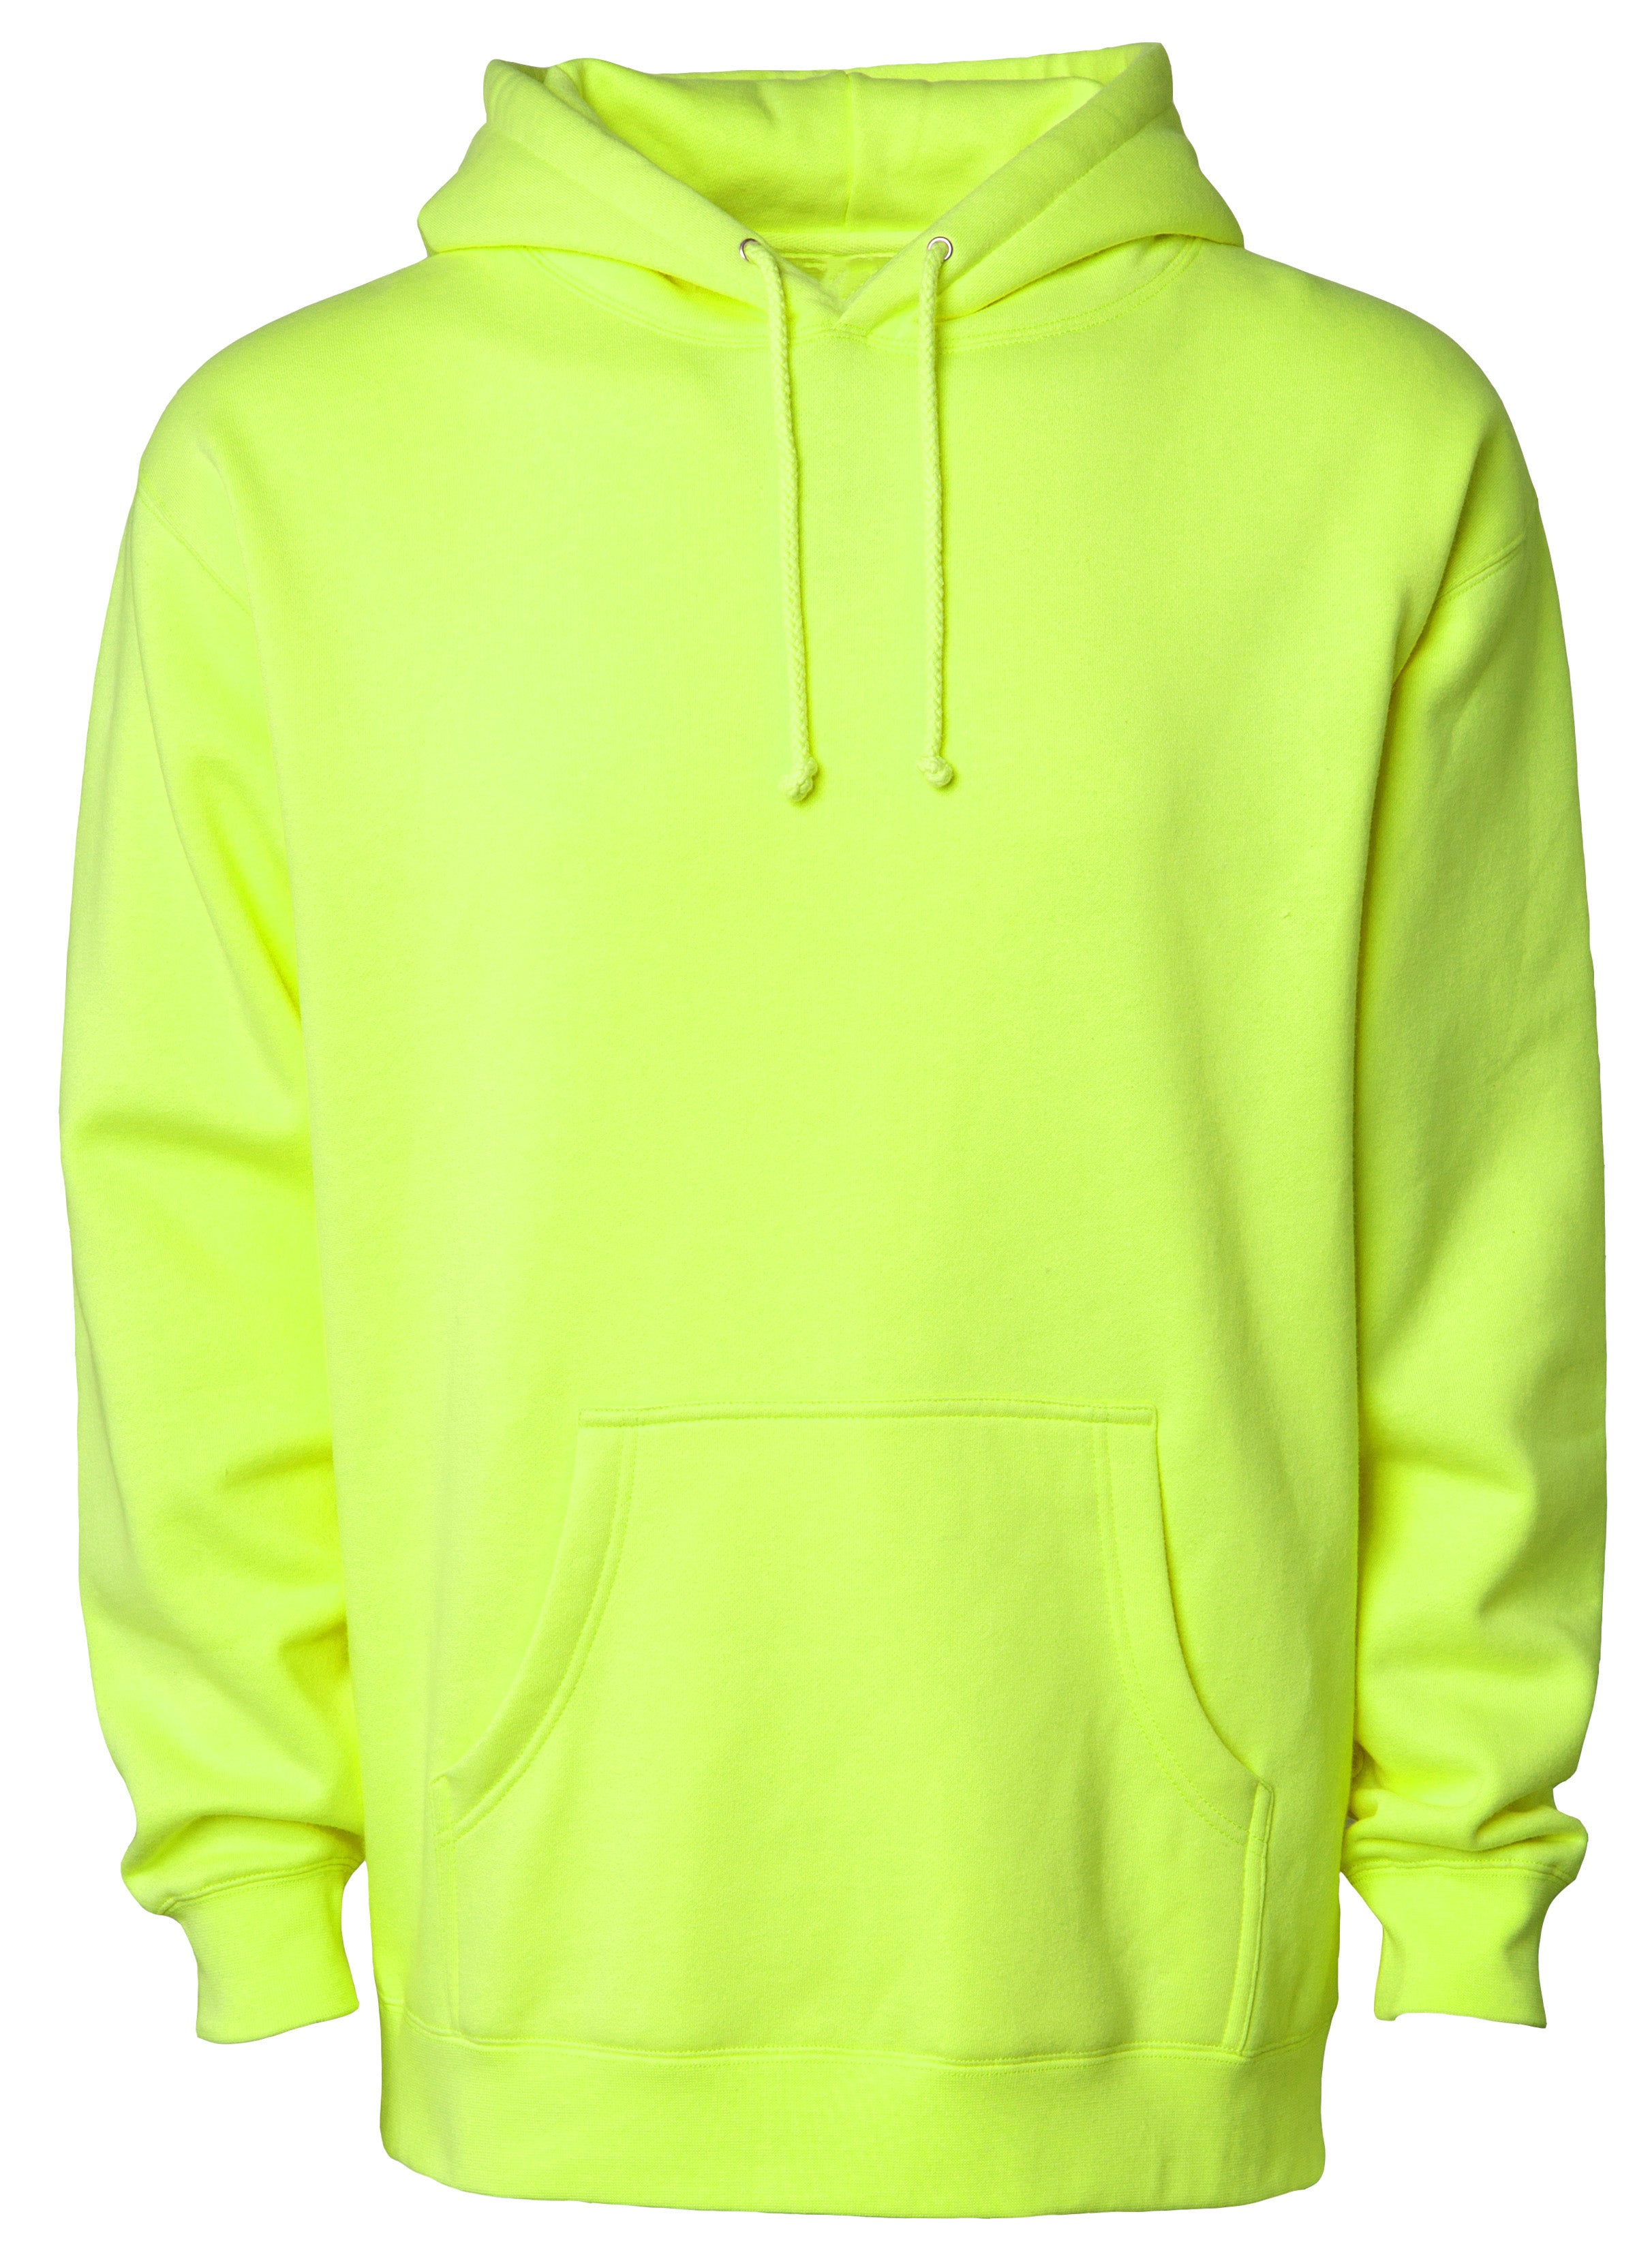 Stand Out in Style: Heavyweight Hoodies in Vibrant Safety Colors